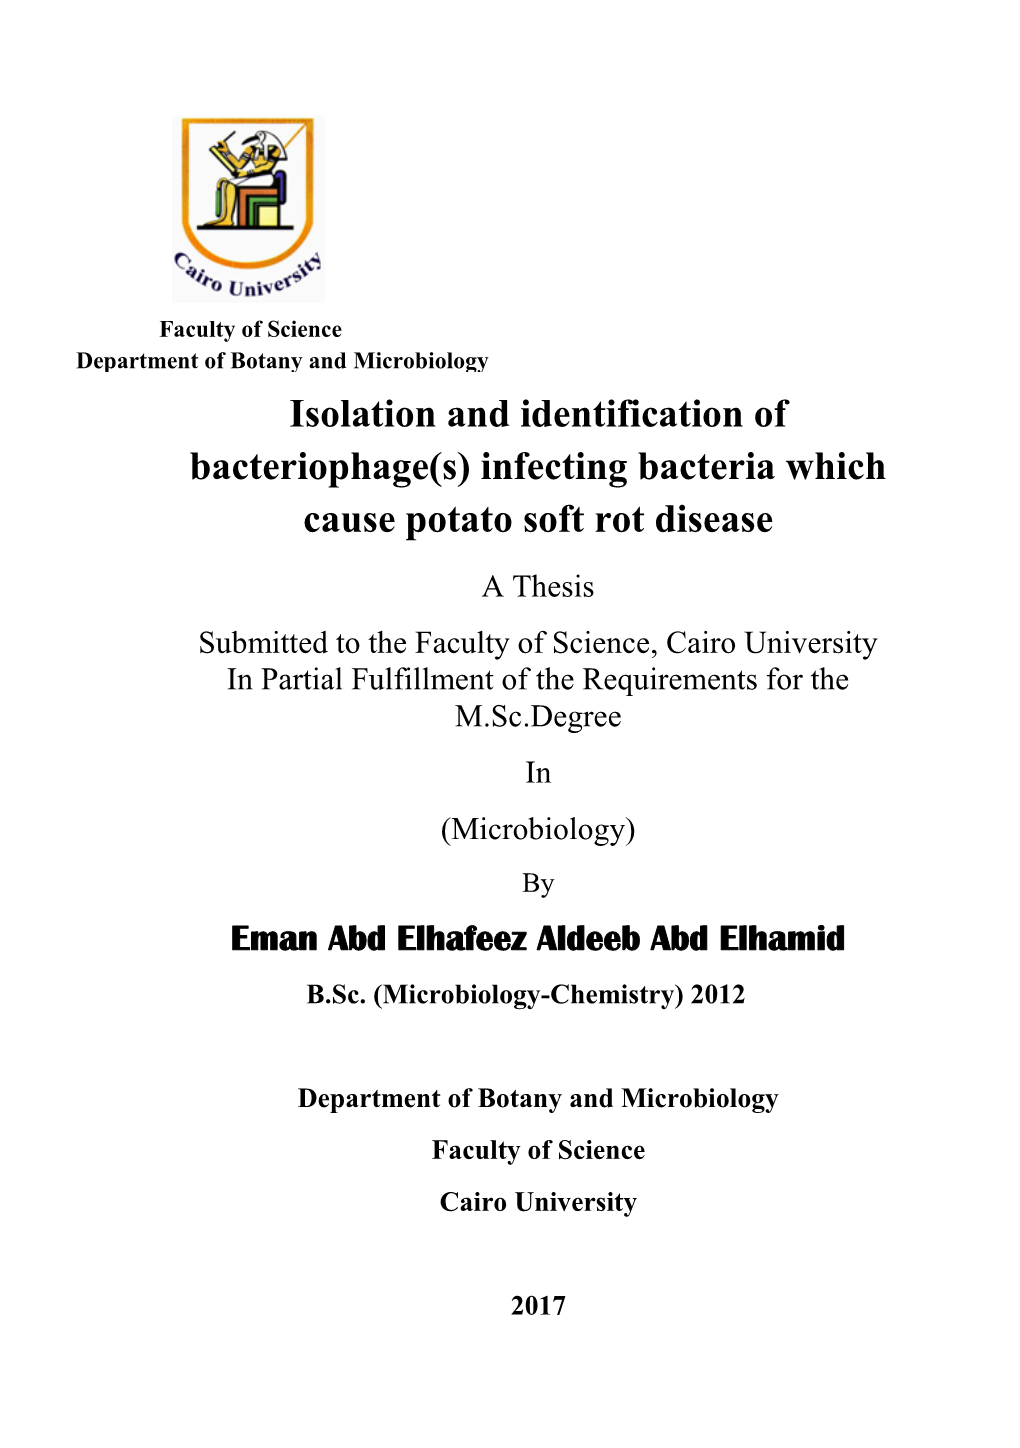 Isolation and Identification of Bacteriophage(S) Infecting Bacteria Which Cause Potato Soft Rot Disease by Eman Abd Elhafeez Aldeeb Abd Elhamid